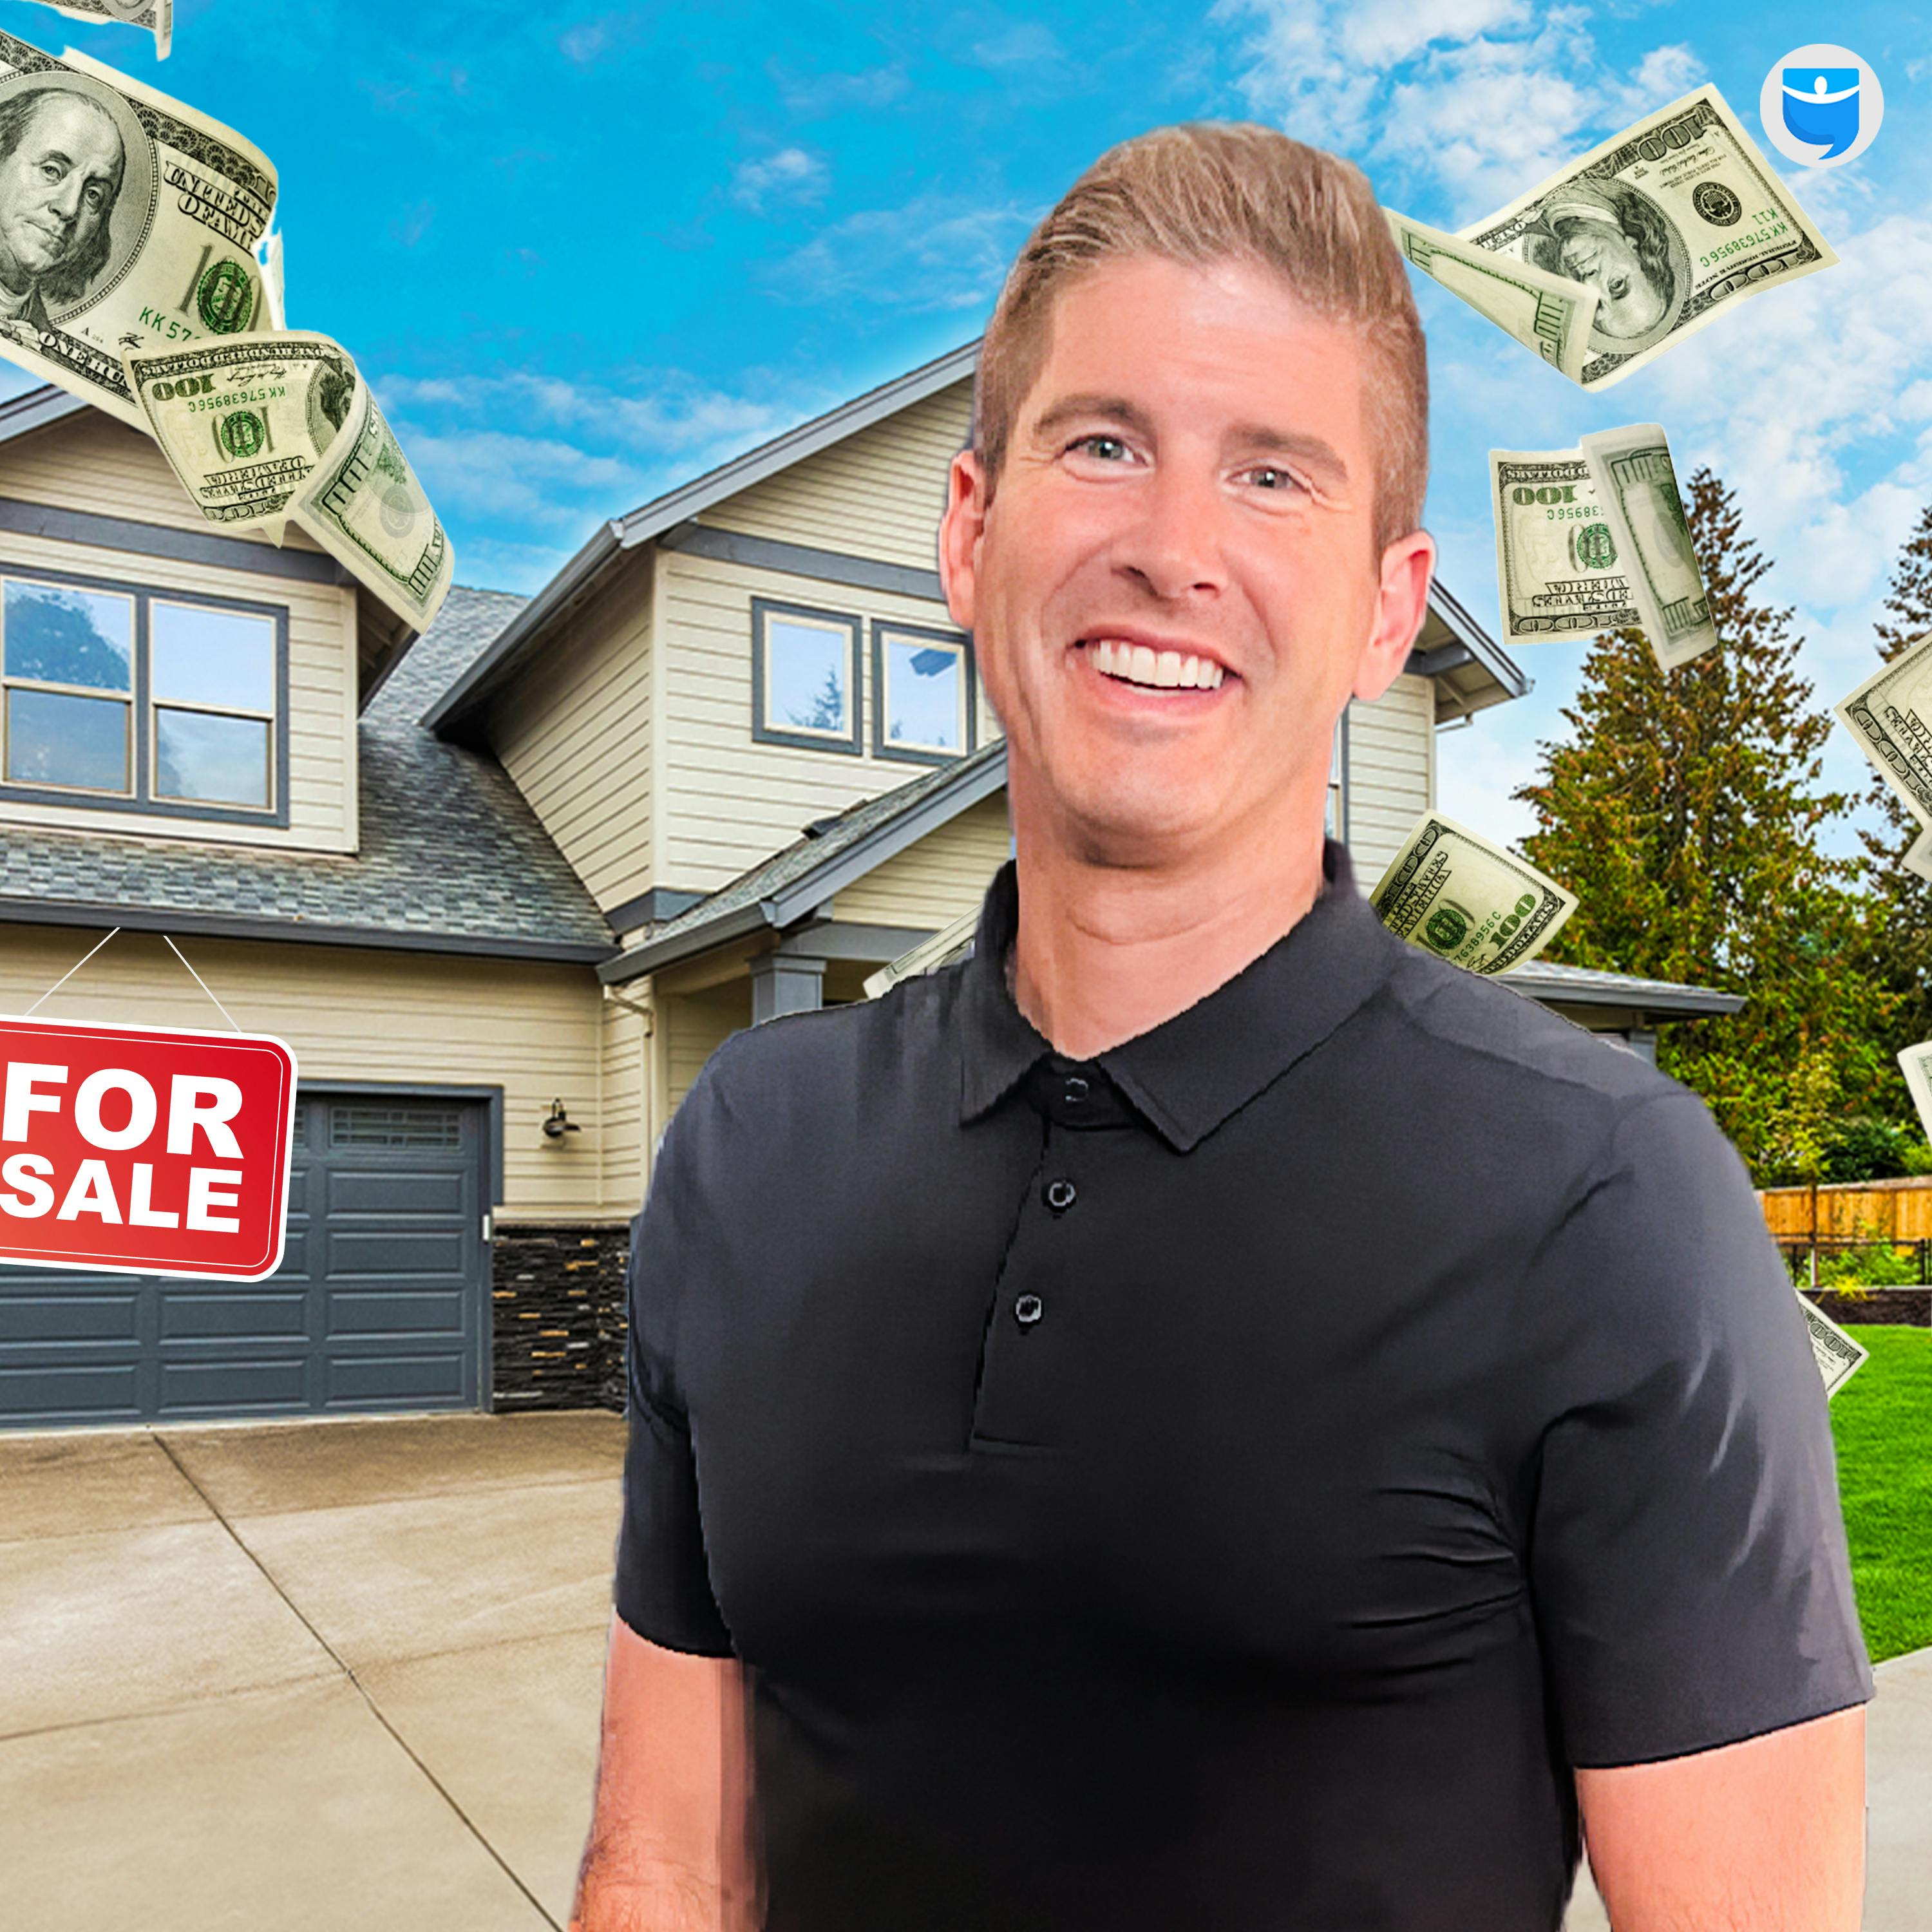 326: The Step-by-Step Guide to Finding the BEST Off-Market Real Estate Deals w/Nate Robbins